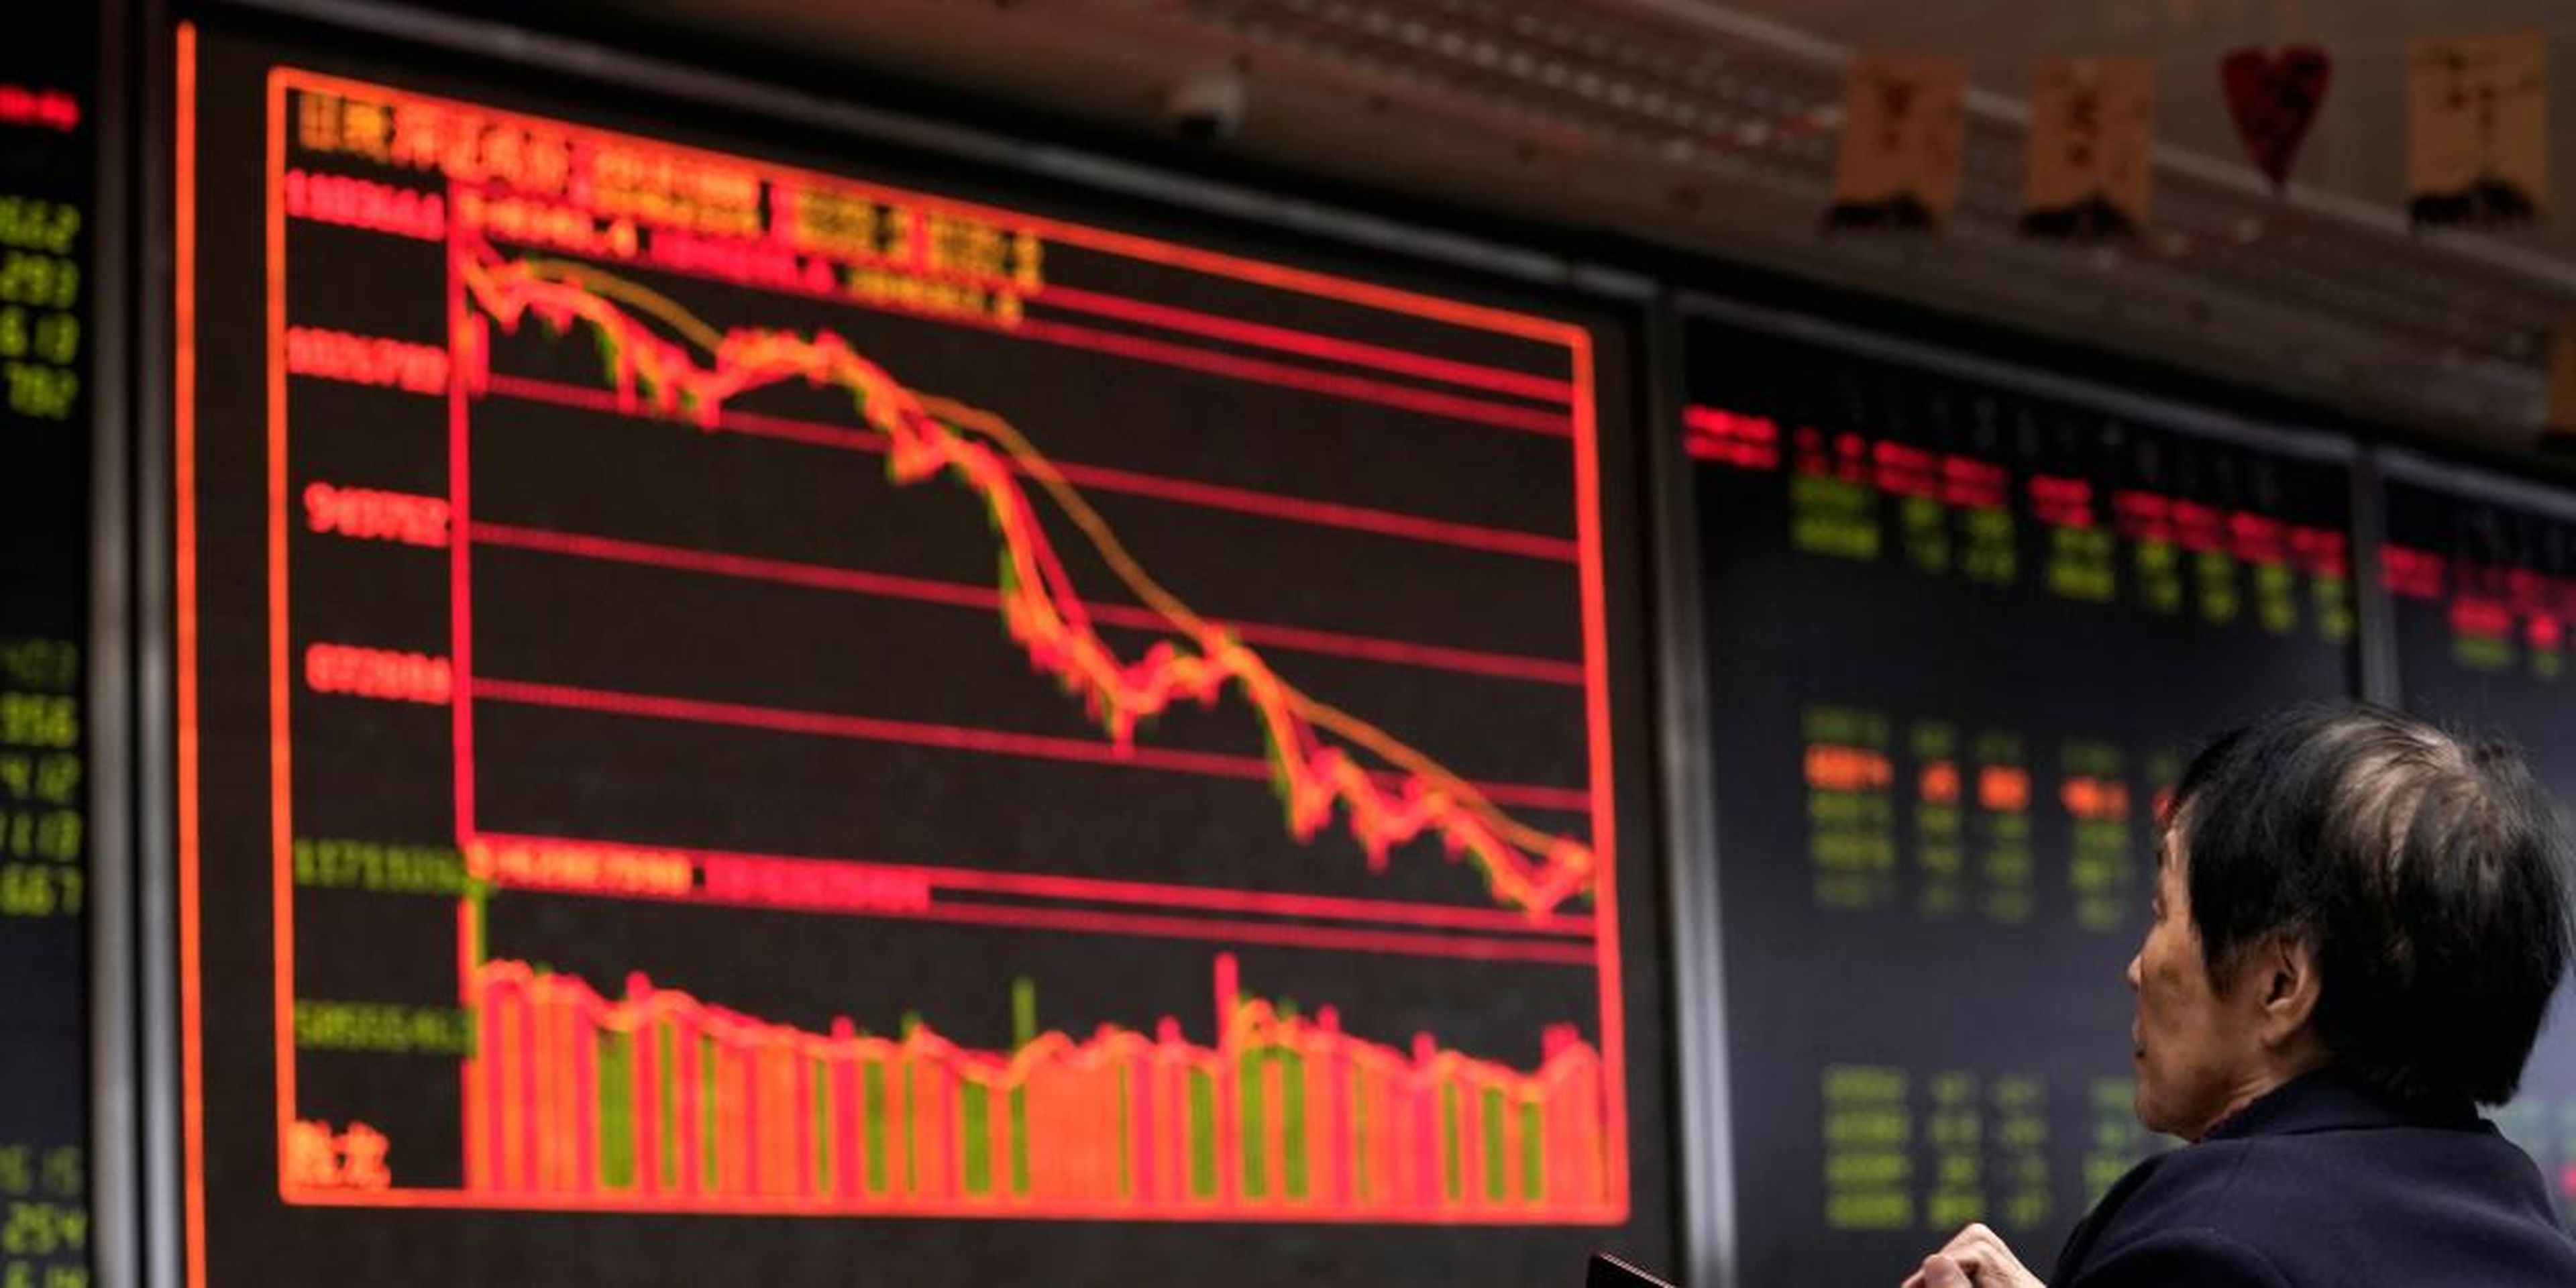 China stocks plunge after authorities lock down Wuhan to contain the deadly coronavirus